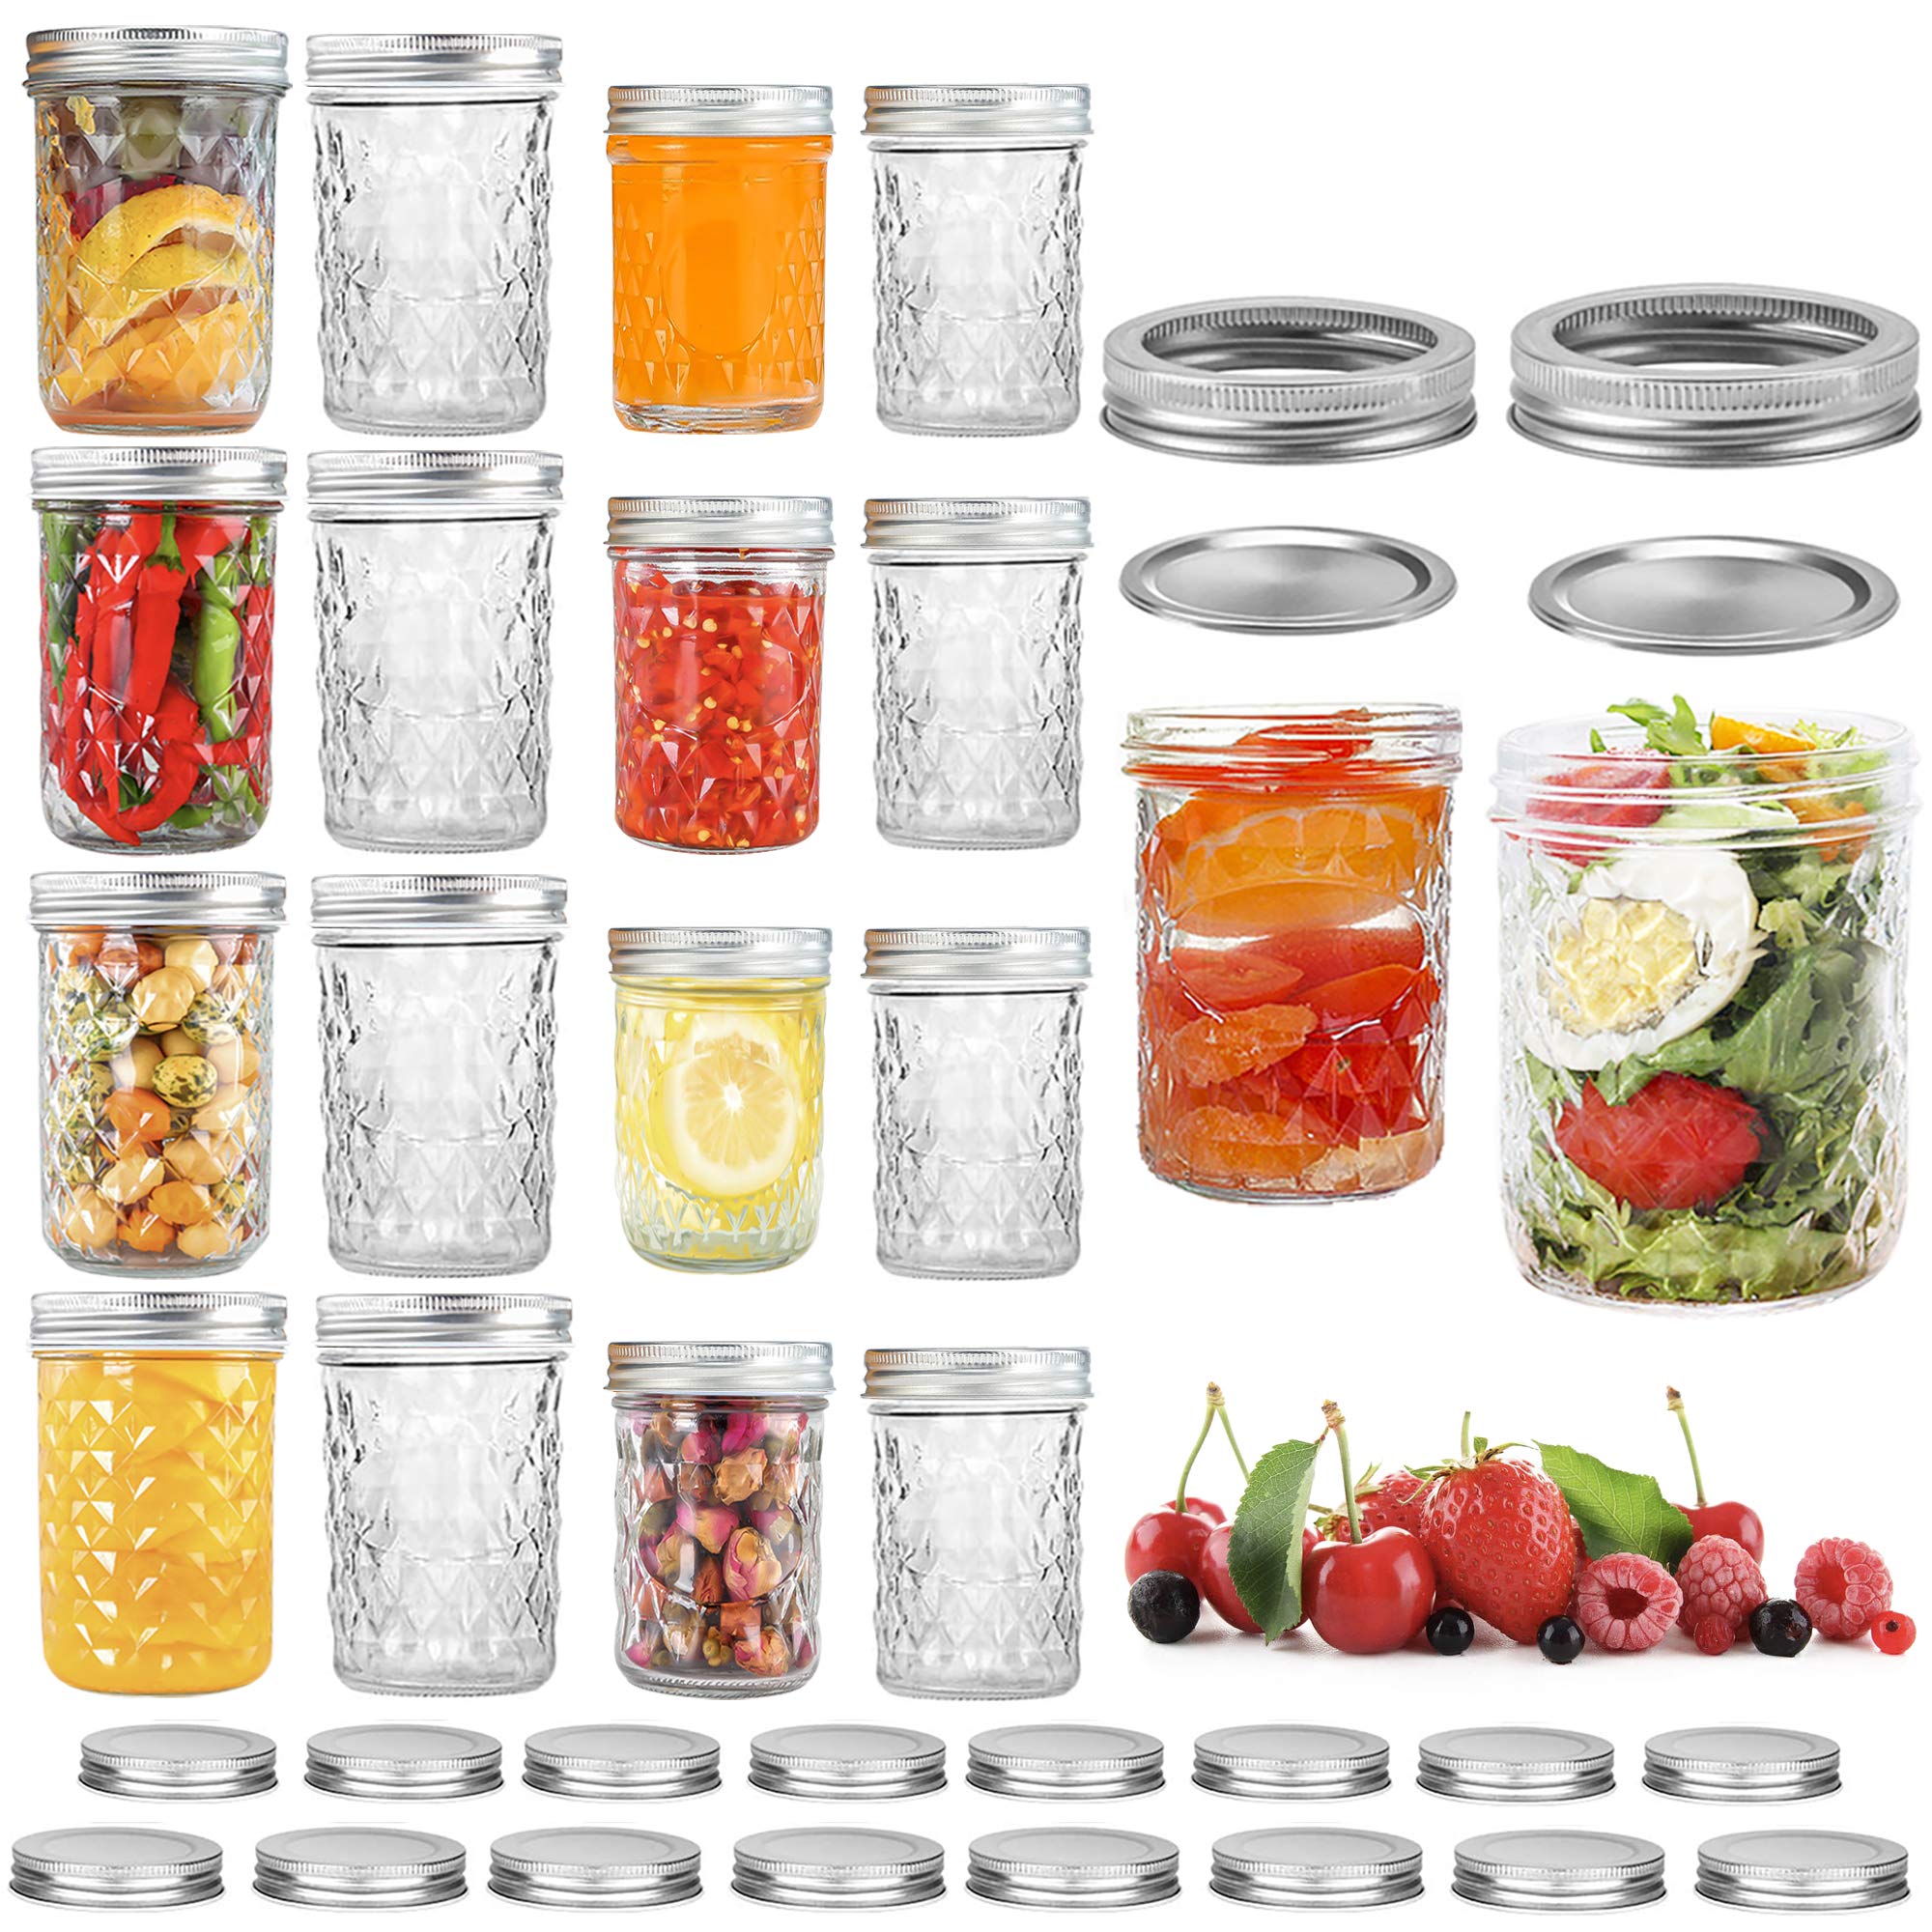 16 Pack Mason Jars with Lids 16 oz (8 Pack) & 8 oz (8 Pack), Canning Jars Wide Mouth, Mason Jar Cup for Jam, Honey, Craft and Dry Food Storage, Lar...